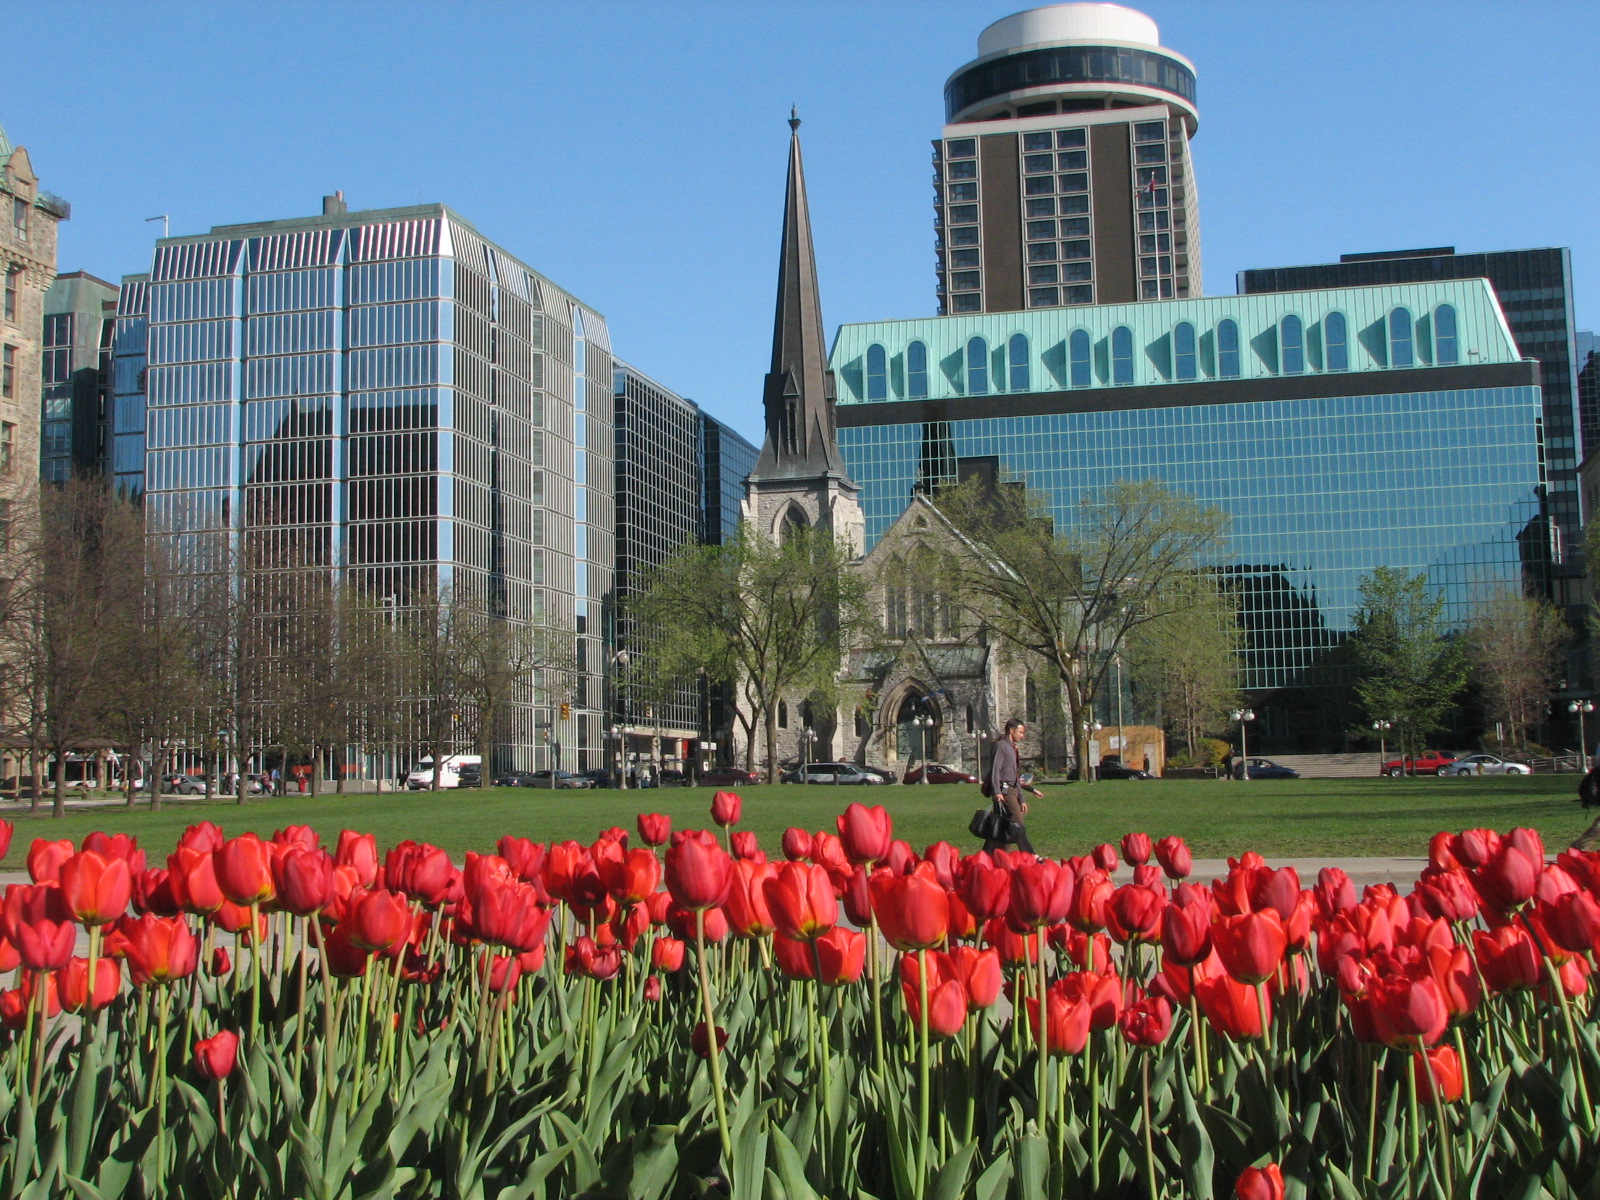 Tulips_in_downtown_Ottawa_from_the_2006_Tulip_Festival.JPG